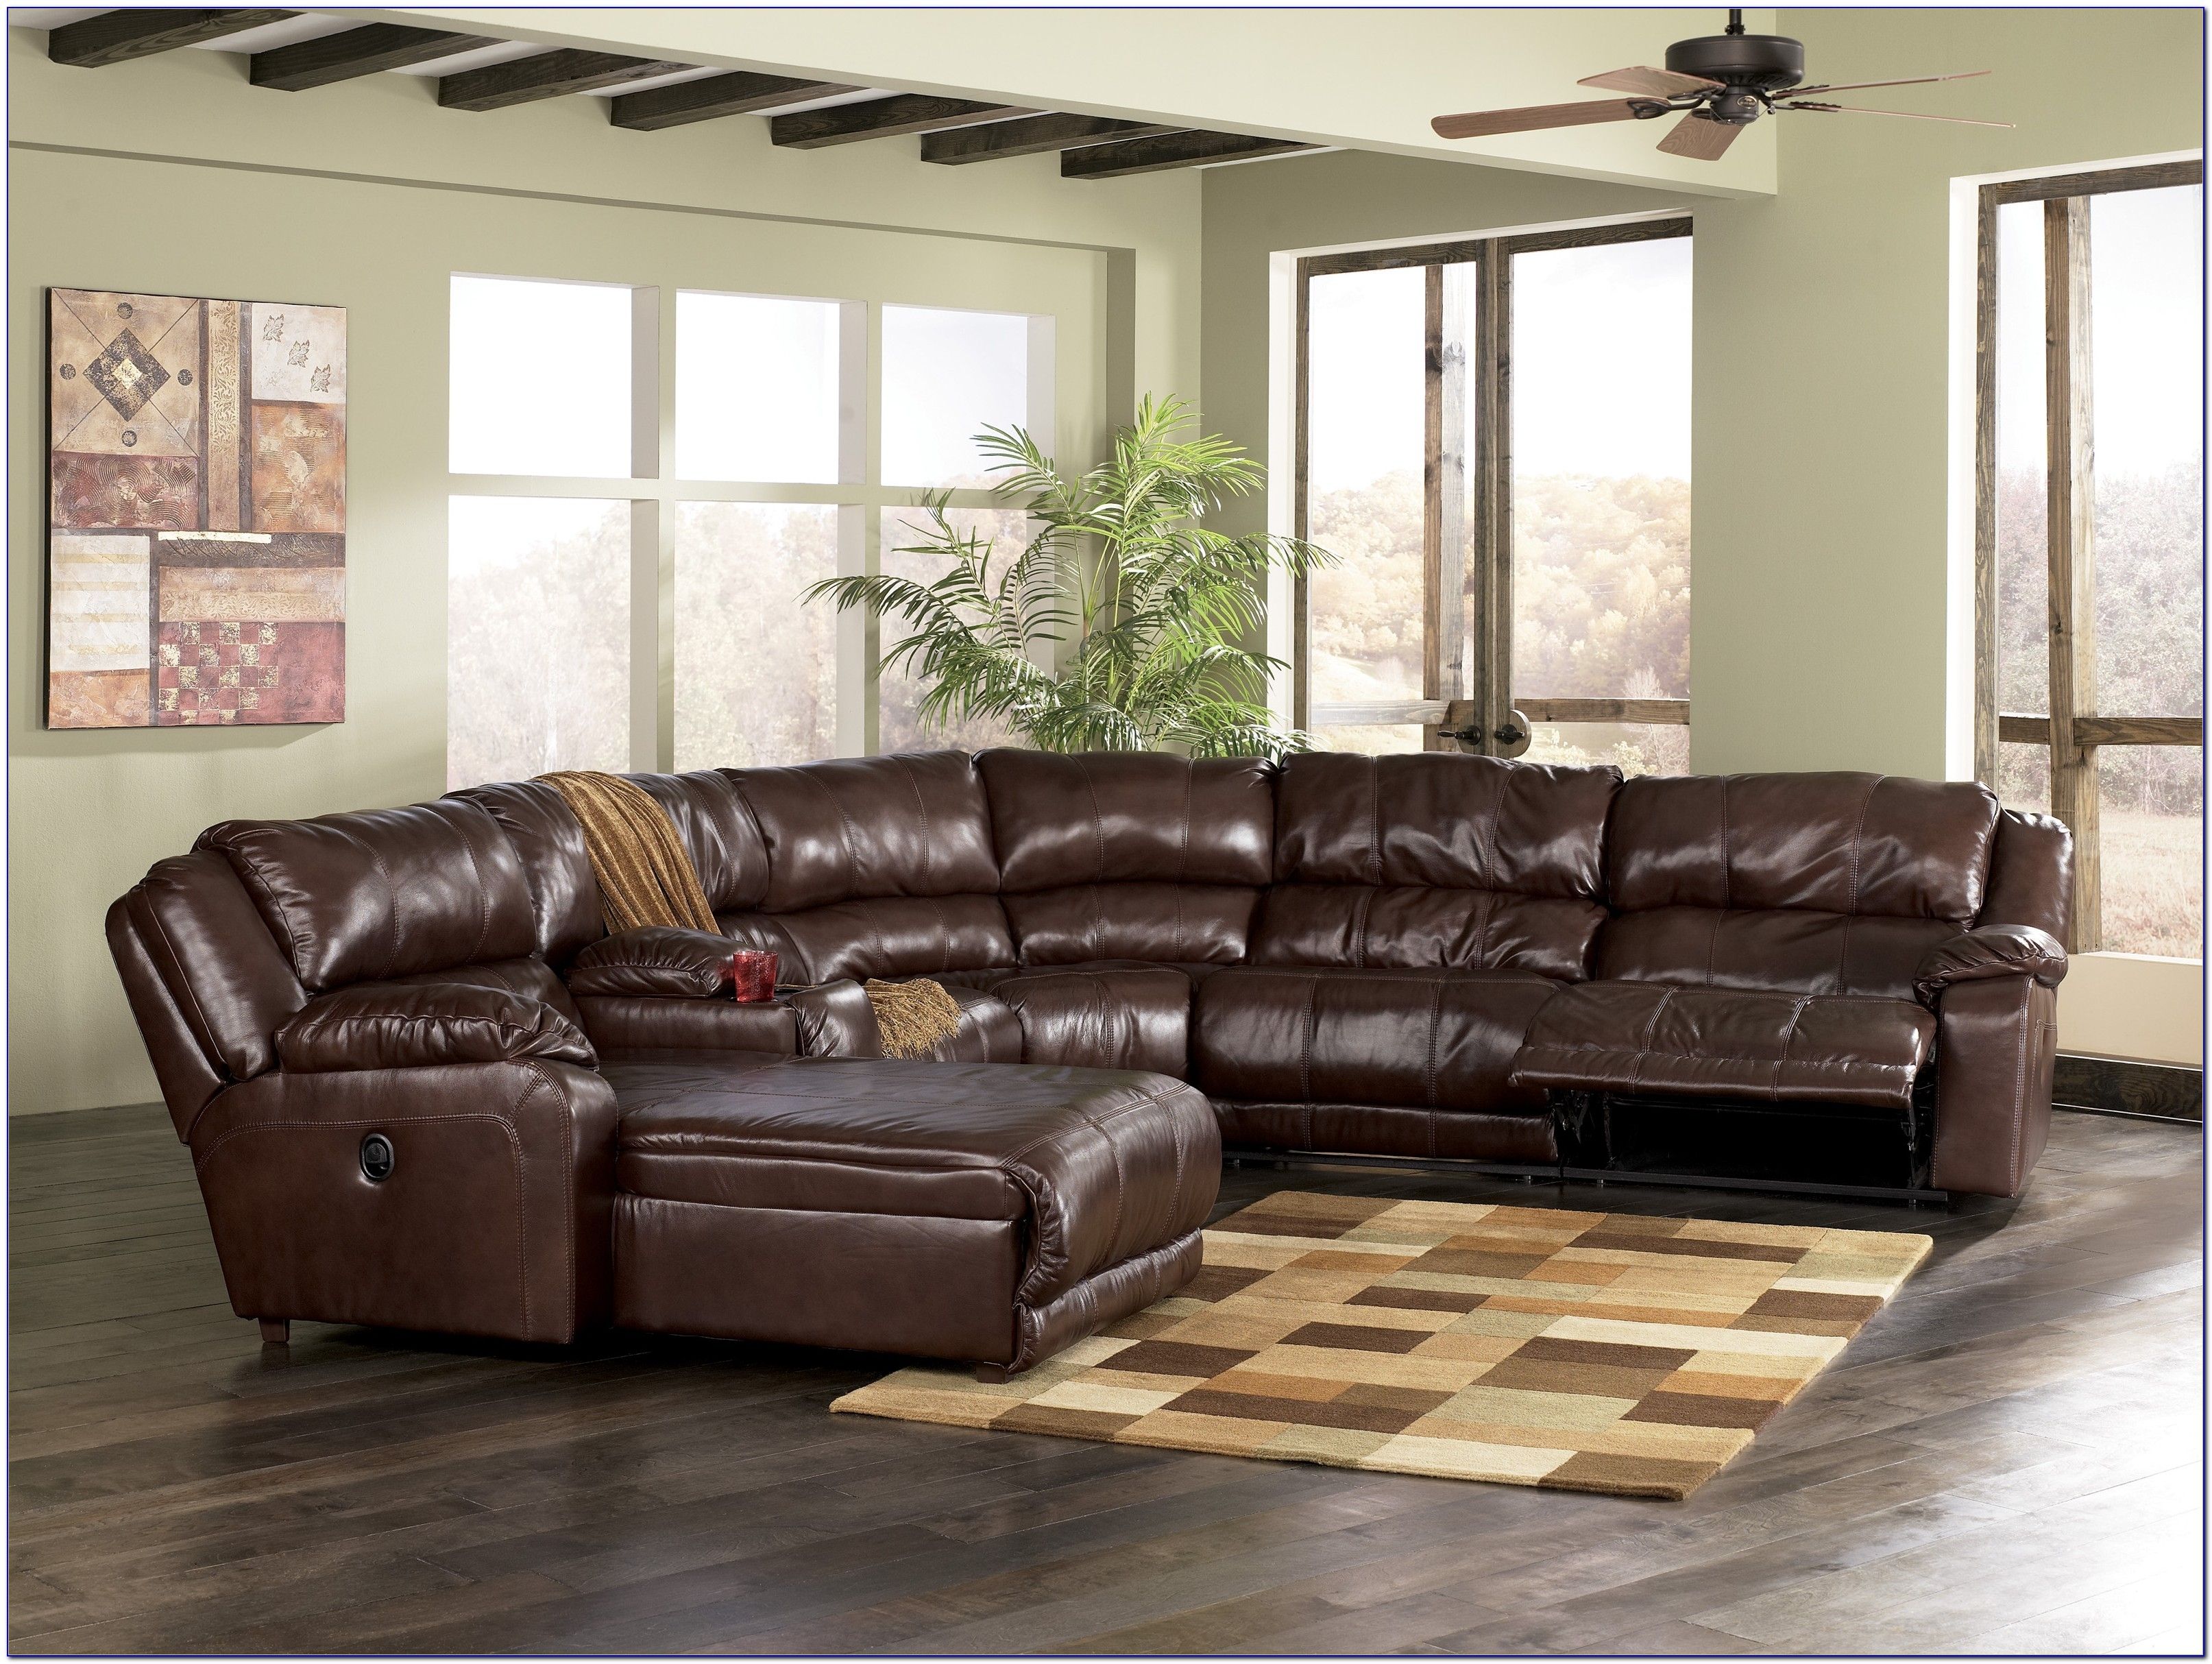 Inspirational High Back Sectional Sofas 67 About Remodel Queen Inside Sectional Sofas With High Backs 